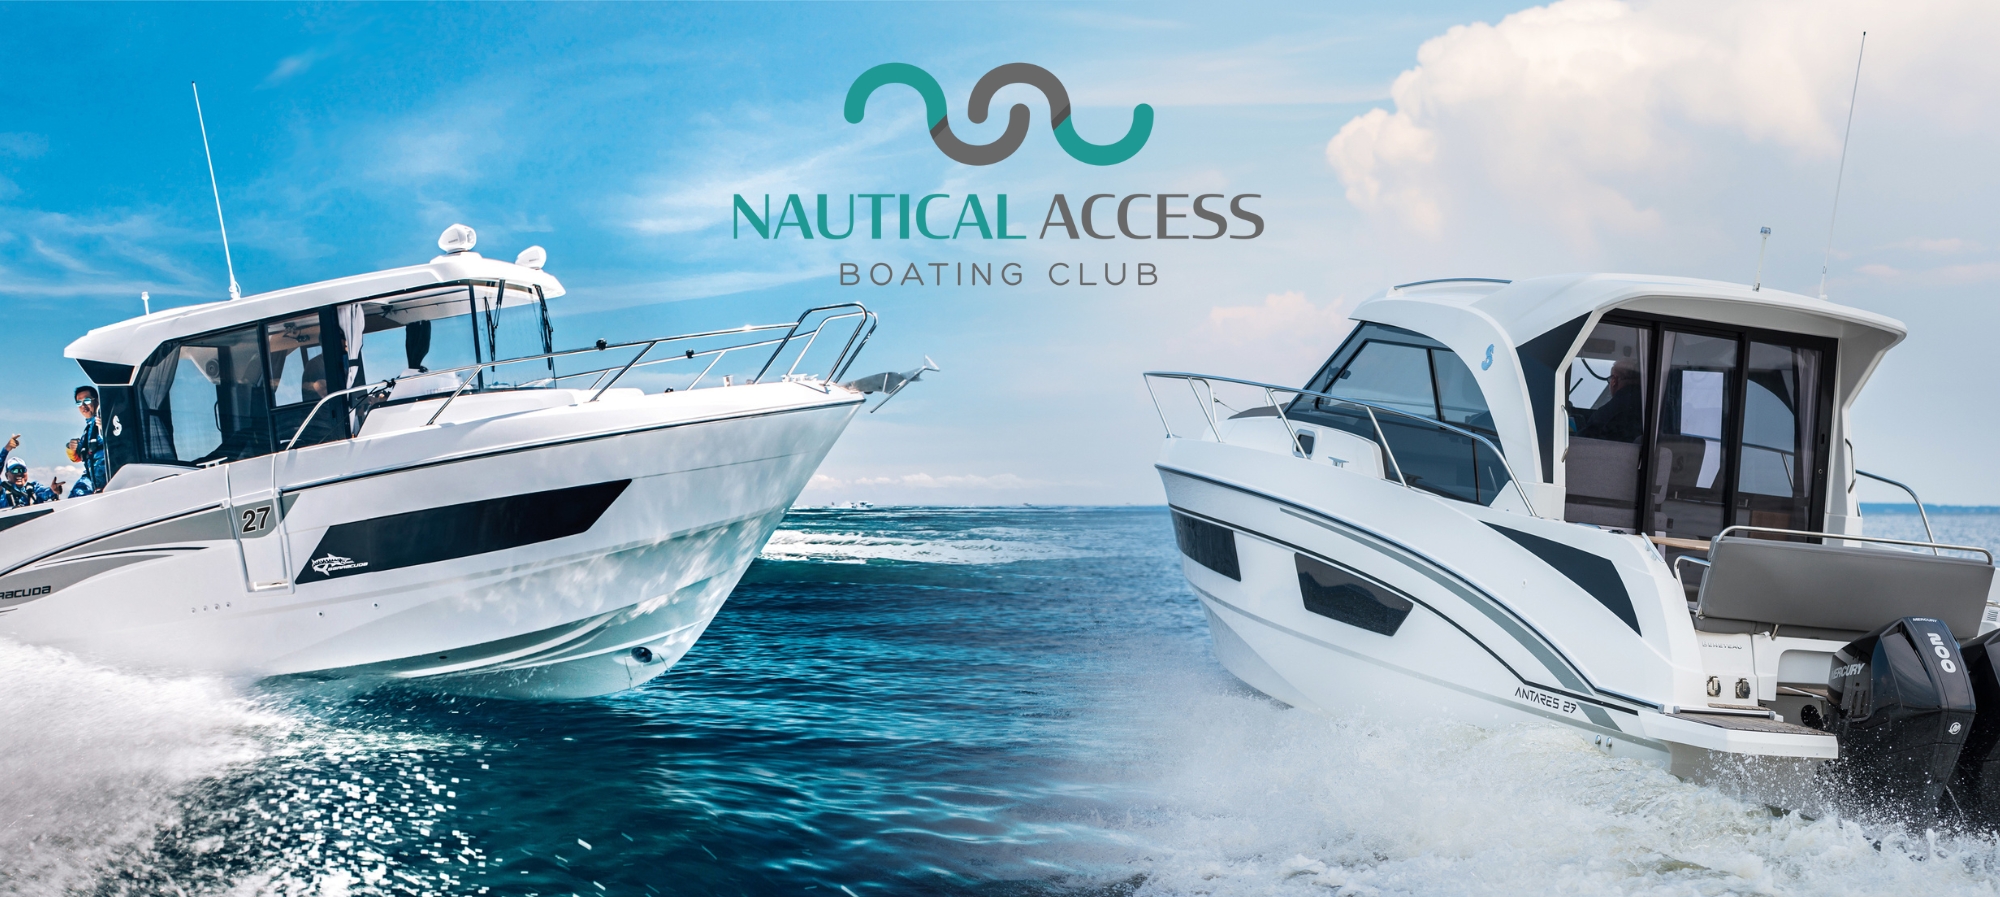 Copy of Nautical Access Boating Club Mailer Header 12-21